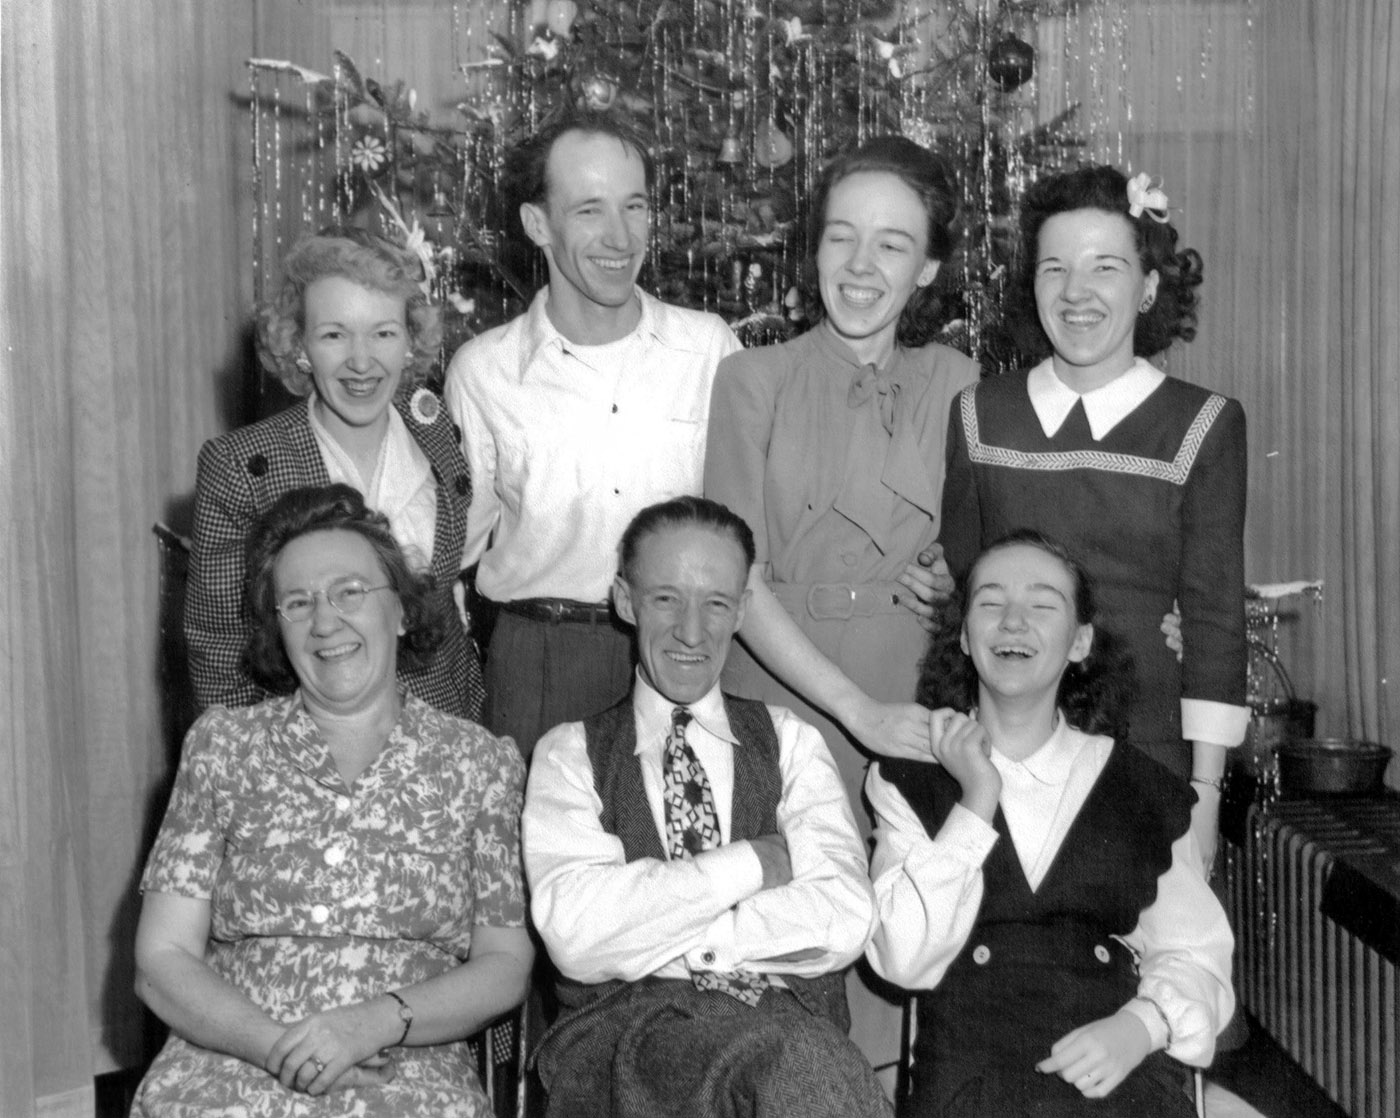 The McWhinnie family Christmas in 1943 with my maternal Grandmother Vivina Ortner, her siblings, and parents.
Top row L to R:
Ruth, David Jr., Mary Alice, Vivina
Bottom row L to R:
parents Ruth & David, and baby of the family Dolores.

Dr. Mary Alice McWhinnie was a famous pioneer as a female scientist in Antarctica.  Read a neat blog entry here, including another picture of Mary Alice & the plaque dedicating a bio lab to her at Palmer Station:
http://www.antarctica.uab.edu/blog/401/
